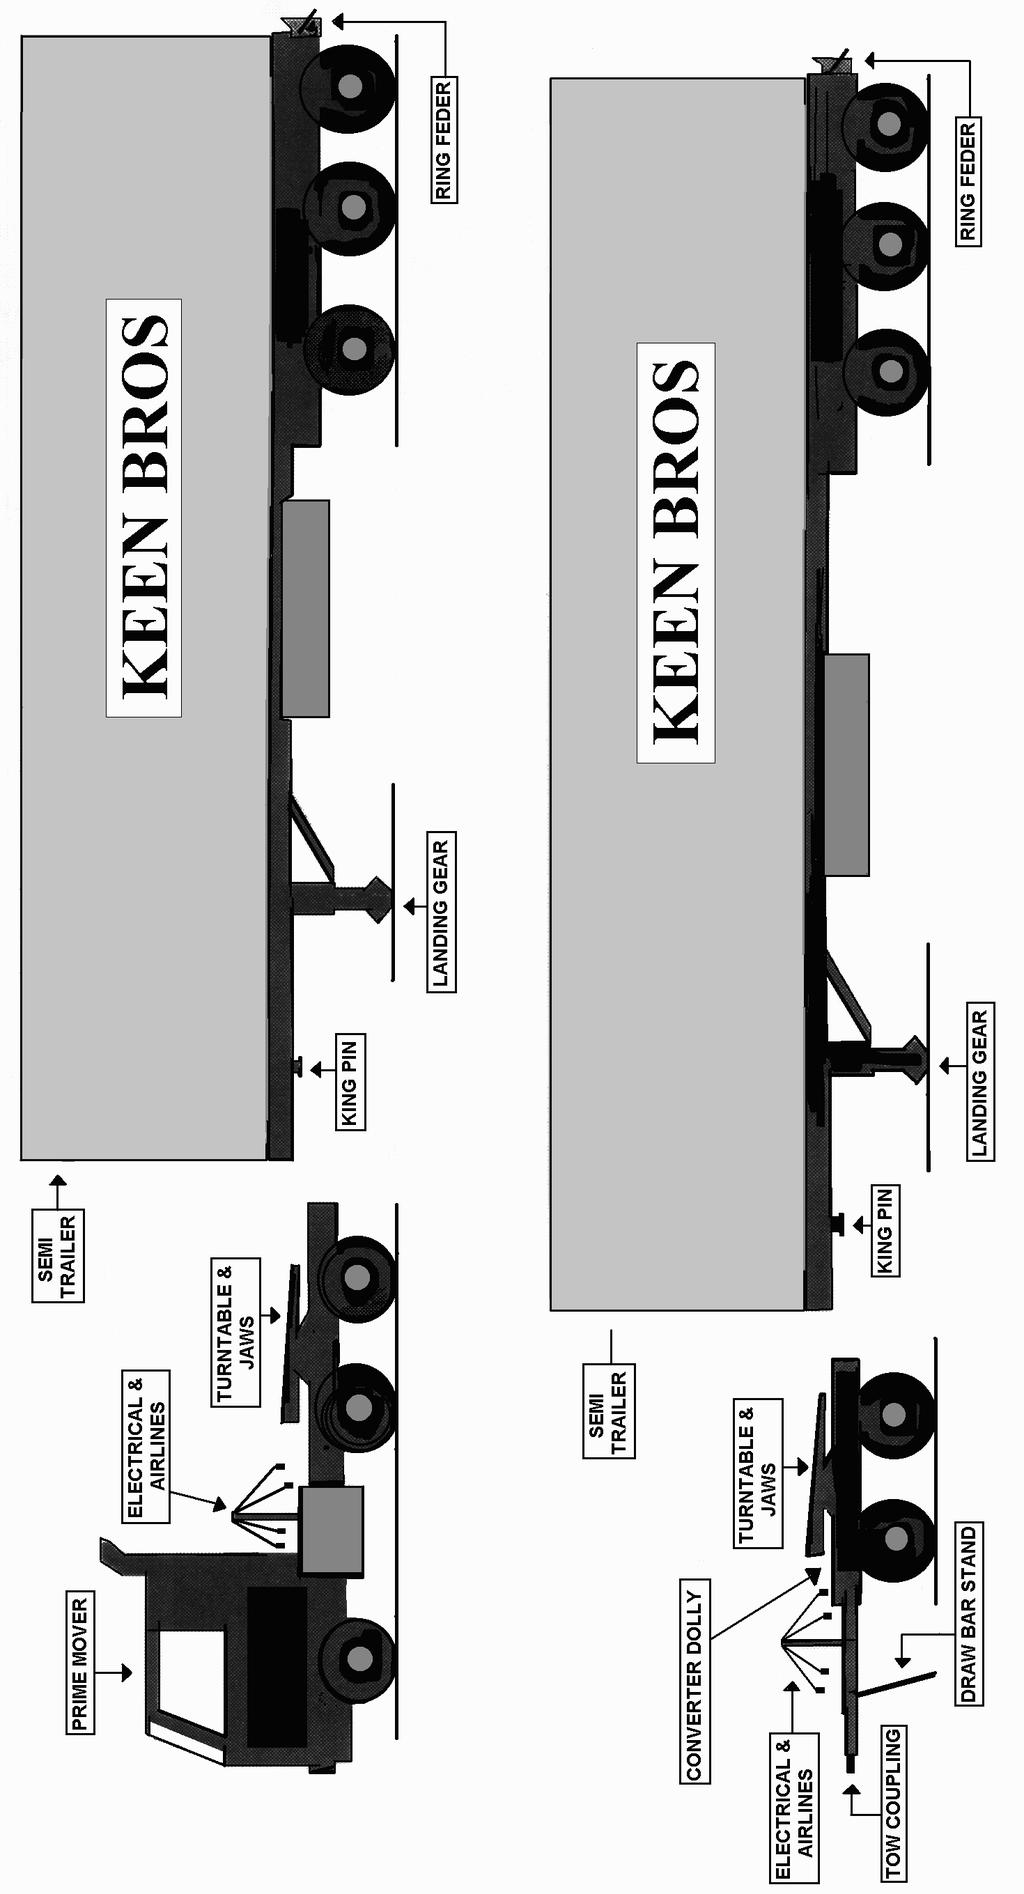 Prime Mover & Semi Trailer/Converter Dolly These diagrams show the location and description of